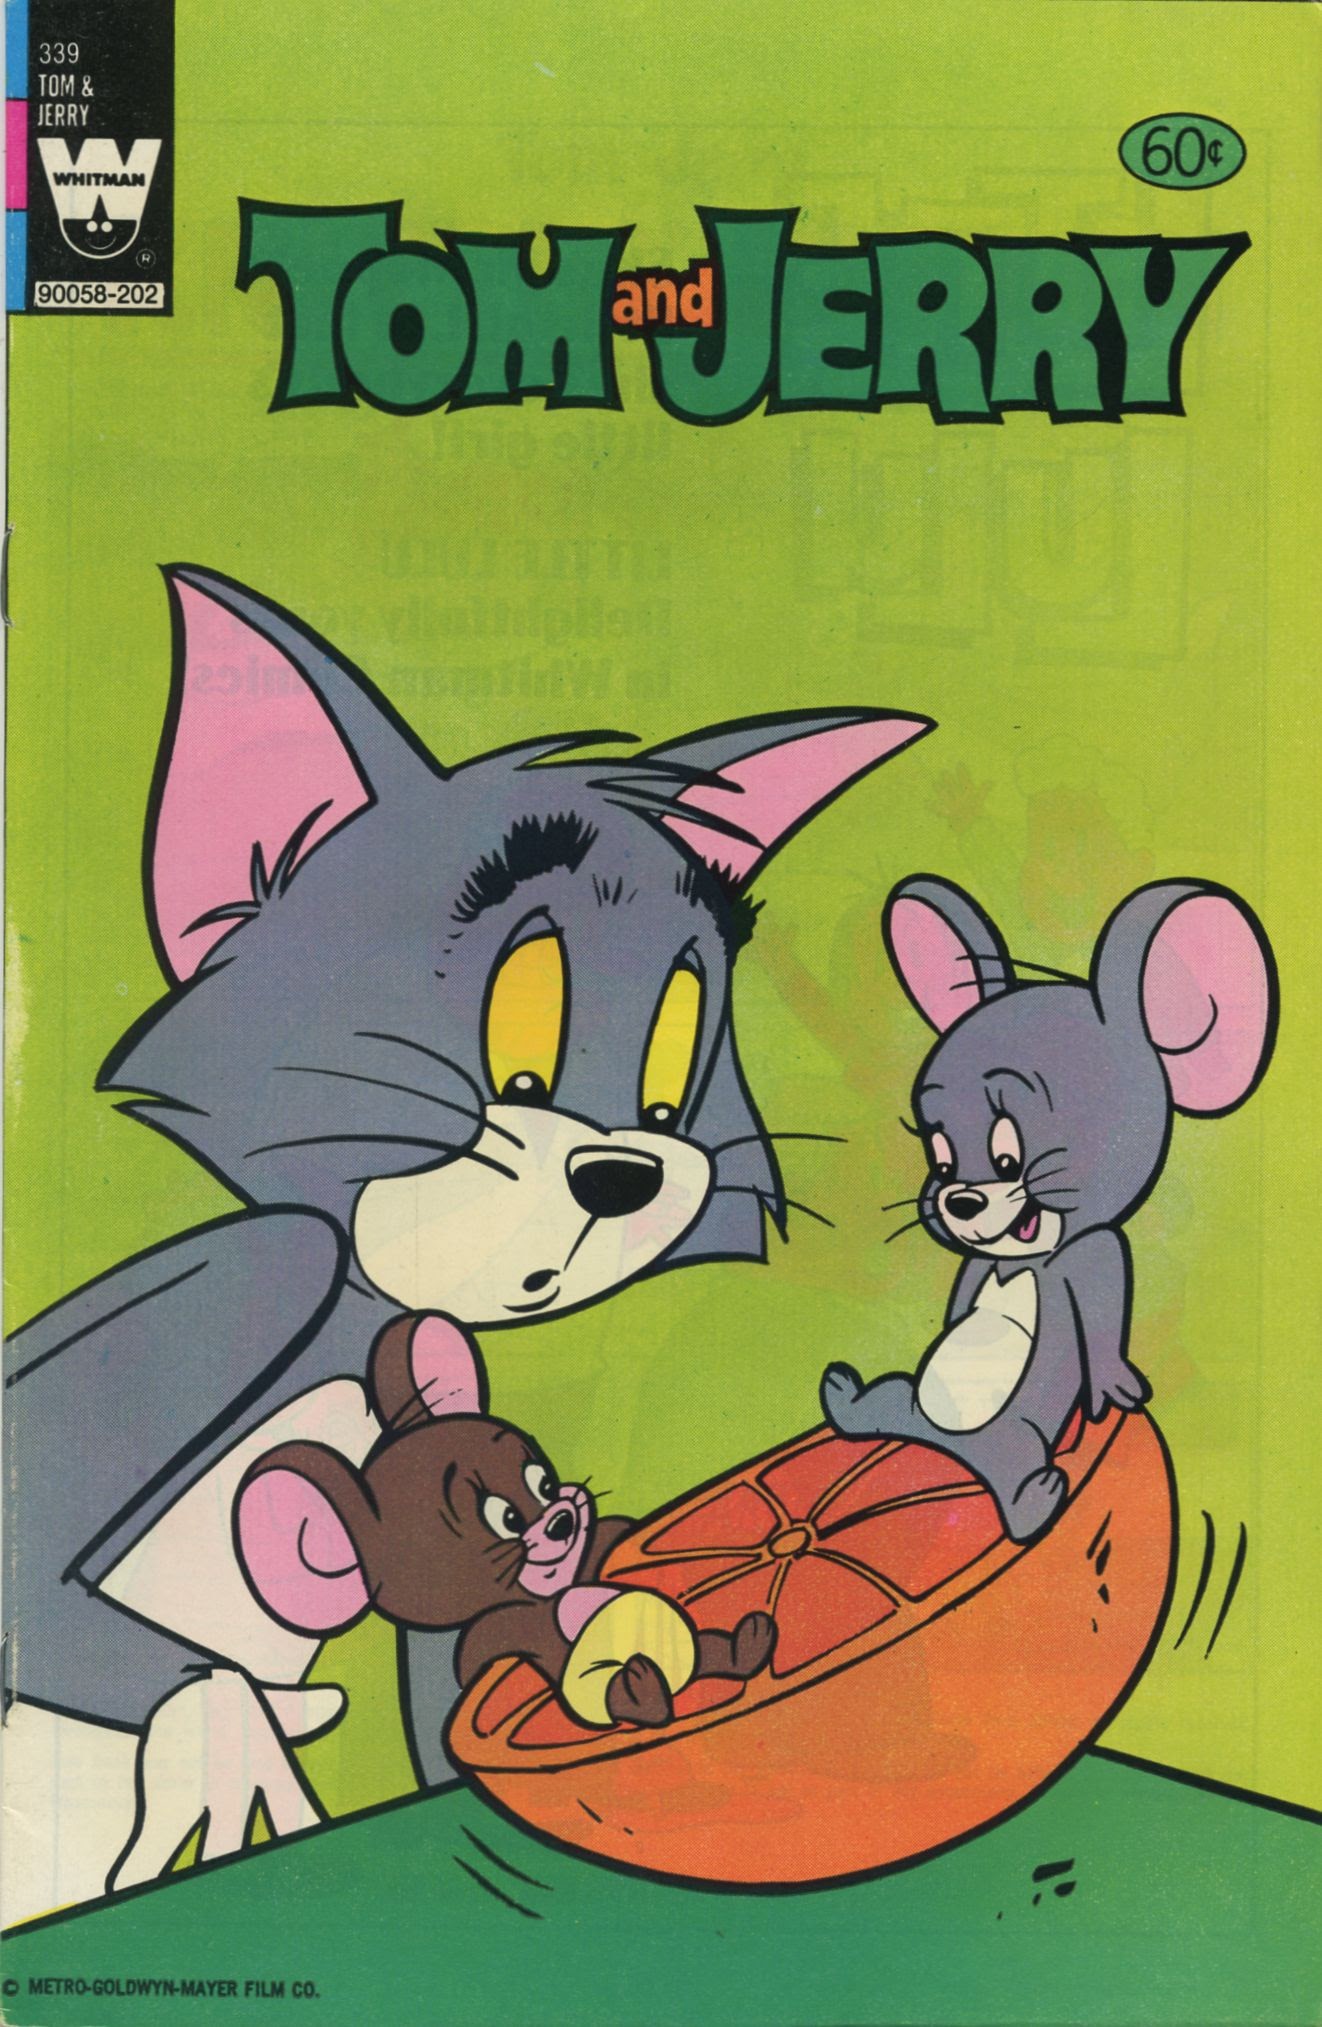 Read online Tom and Jerry comic -  Issue #339 - 1